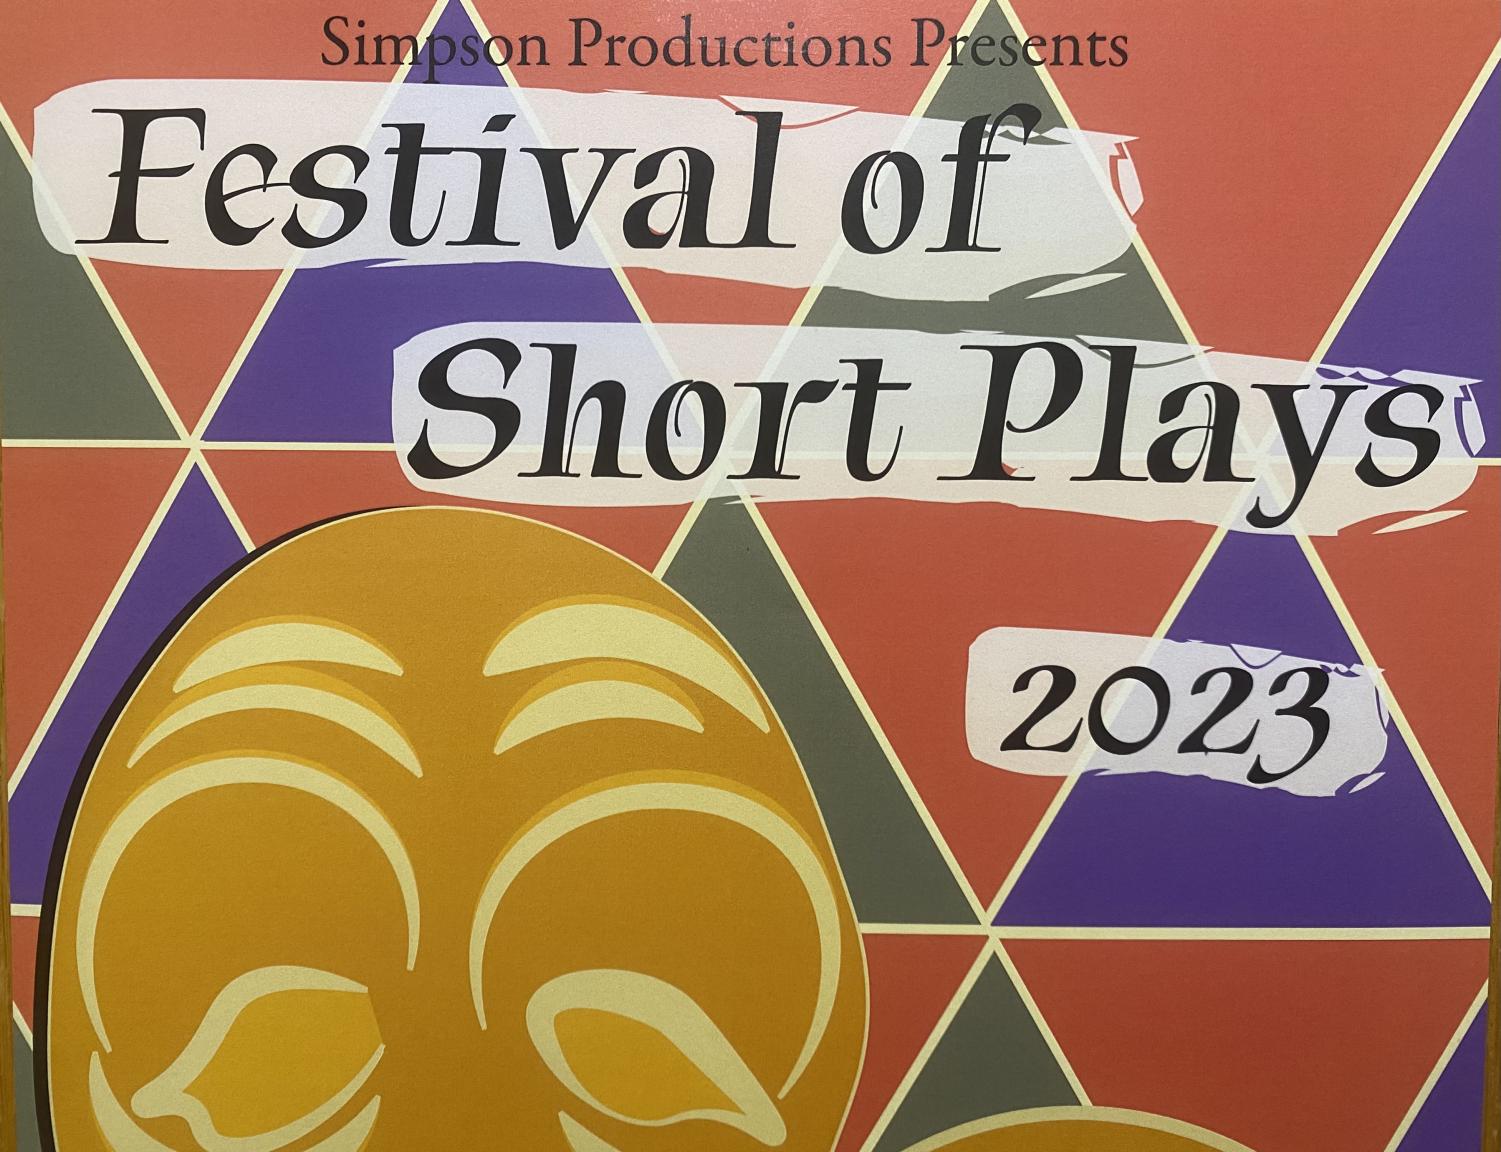 The Festival of Short Plays is three plays directed by Carson Clark, Tanner Striegel and Allison Blades for their Theatre capstone class.